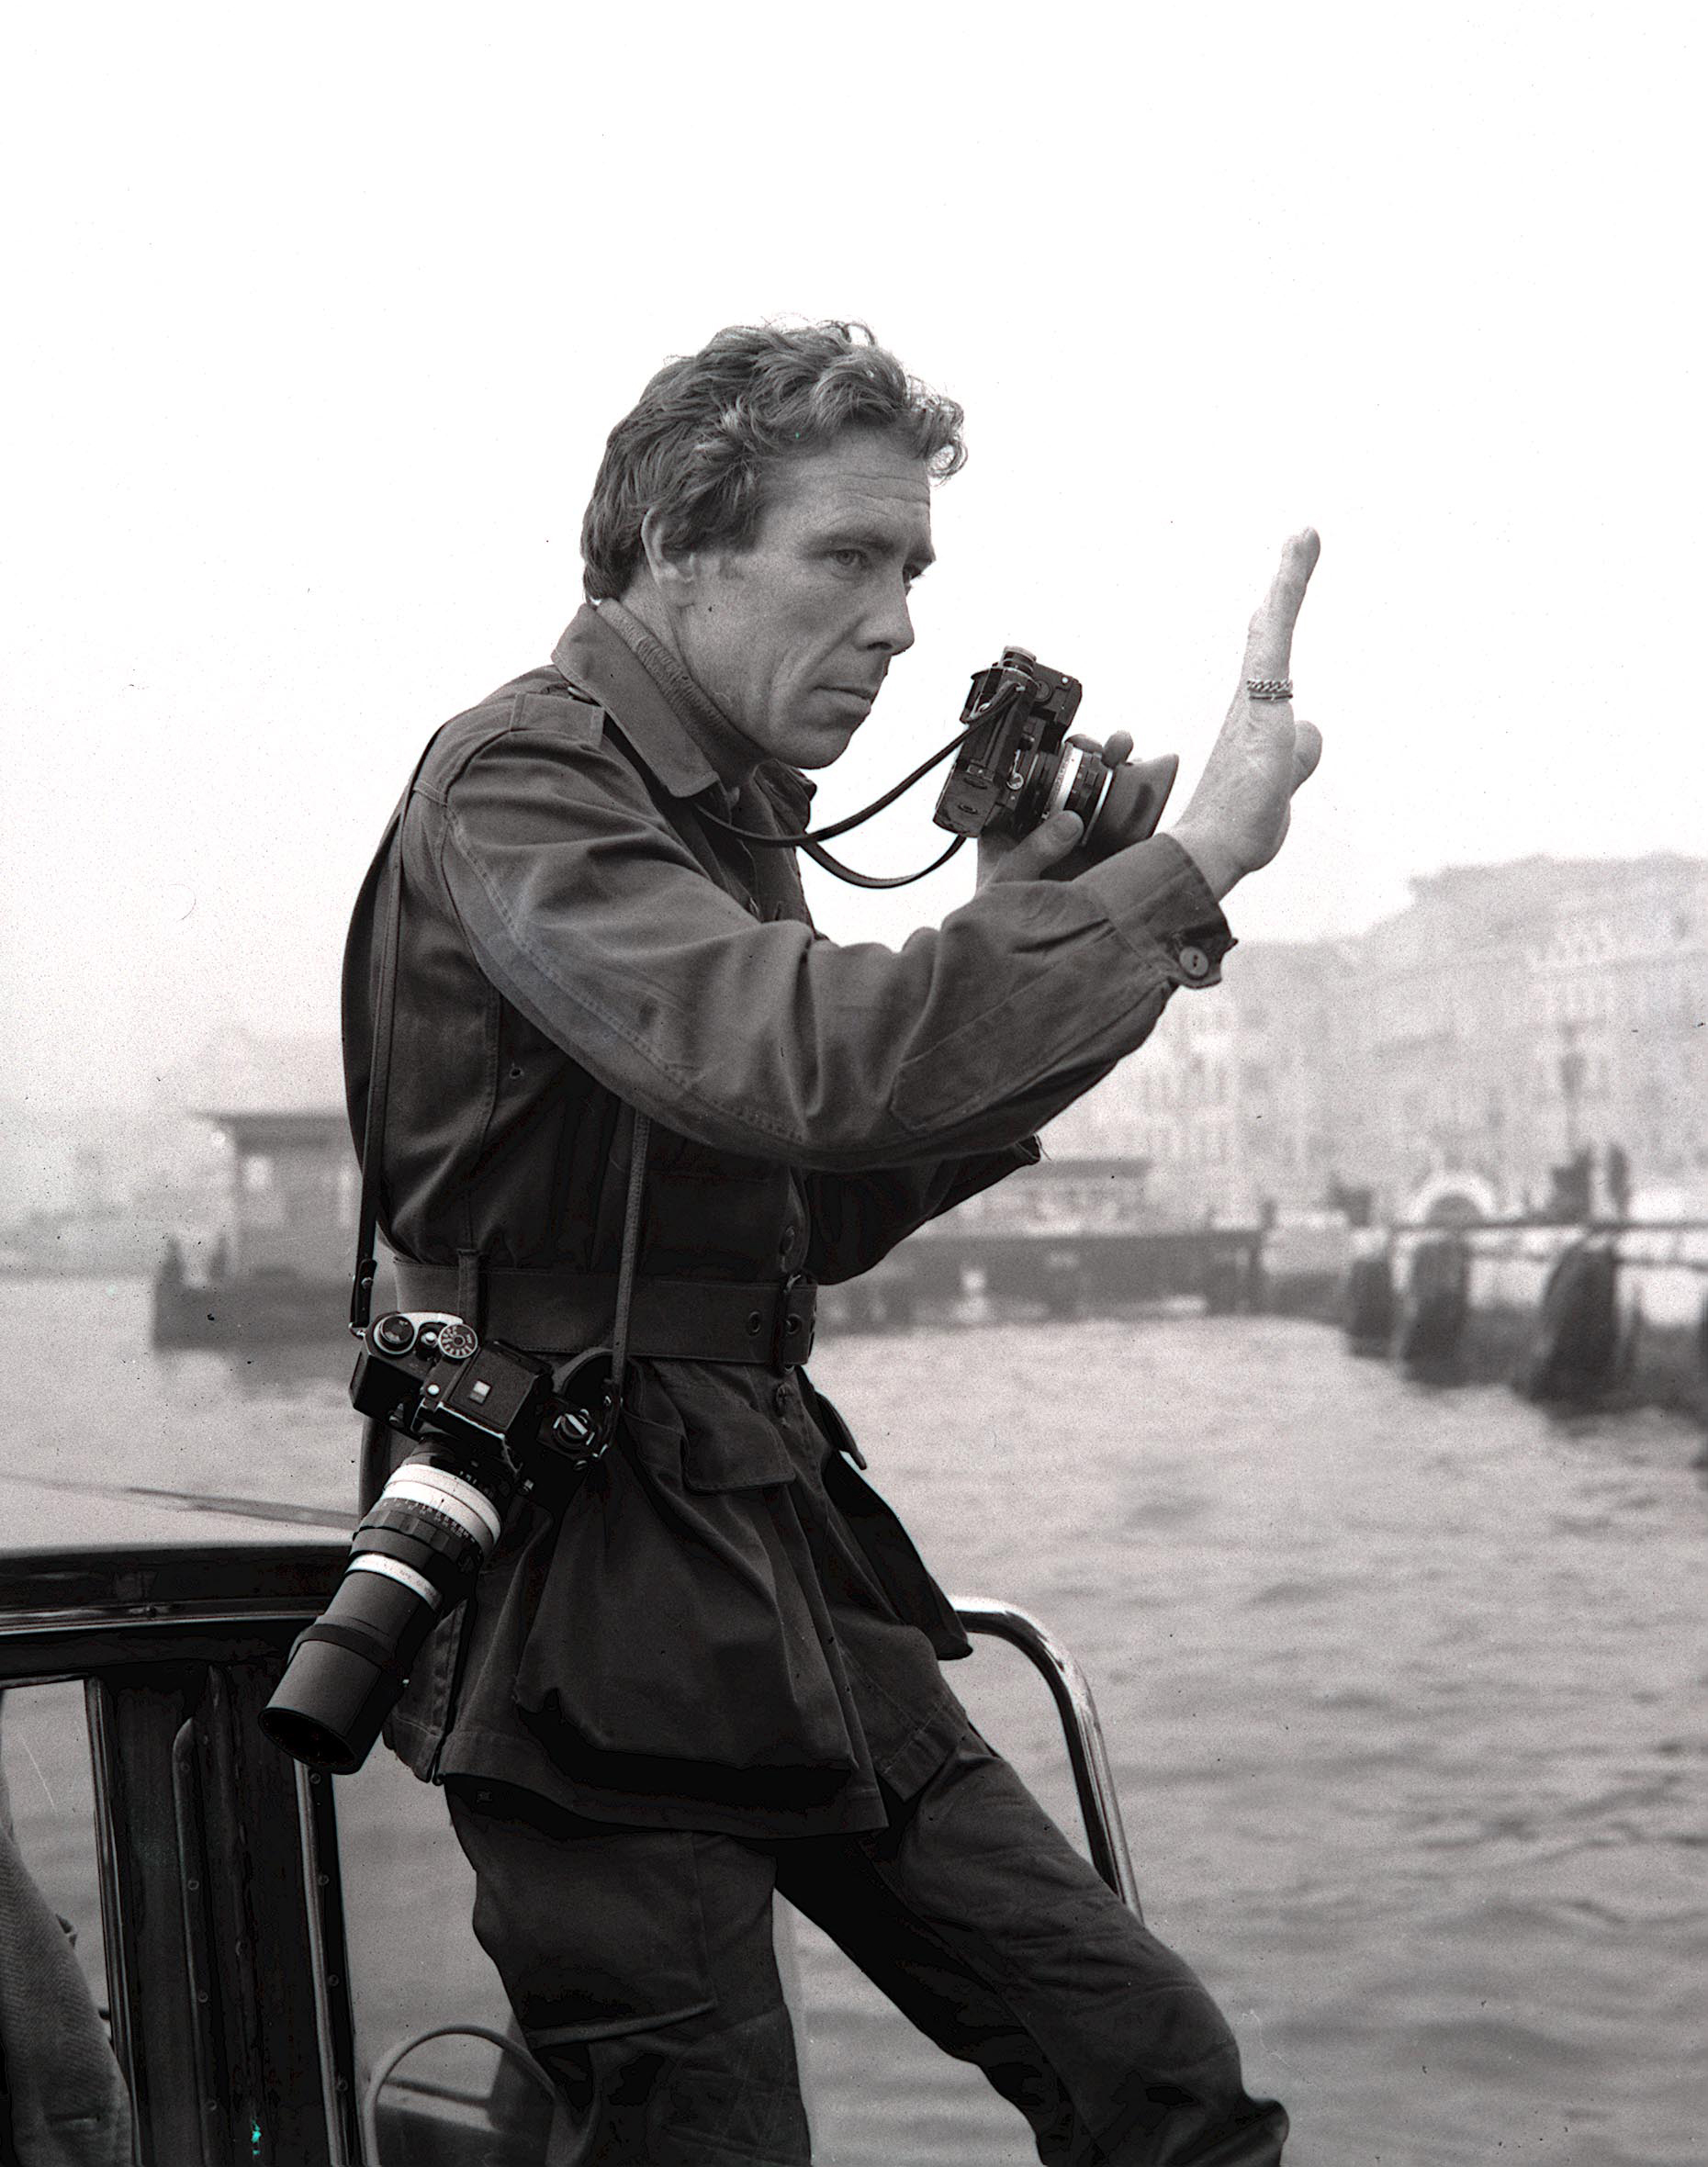 Photographer Lord Snowdon, husband of Princess Margaret, pictured at work in Venice, Italy on Oct. 14, 1971.